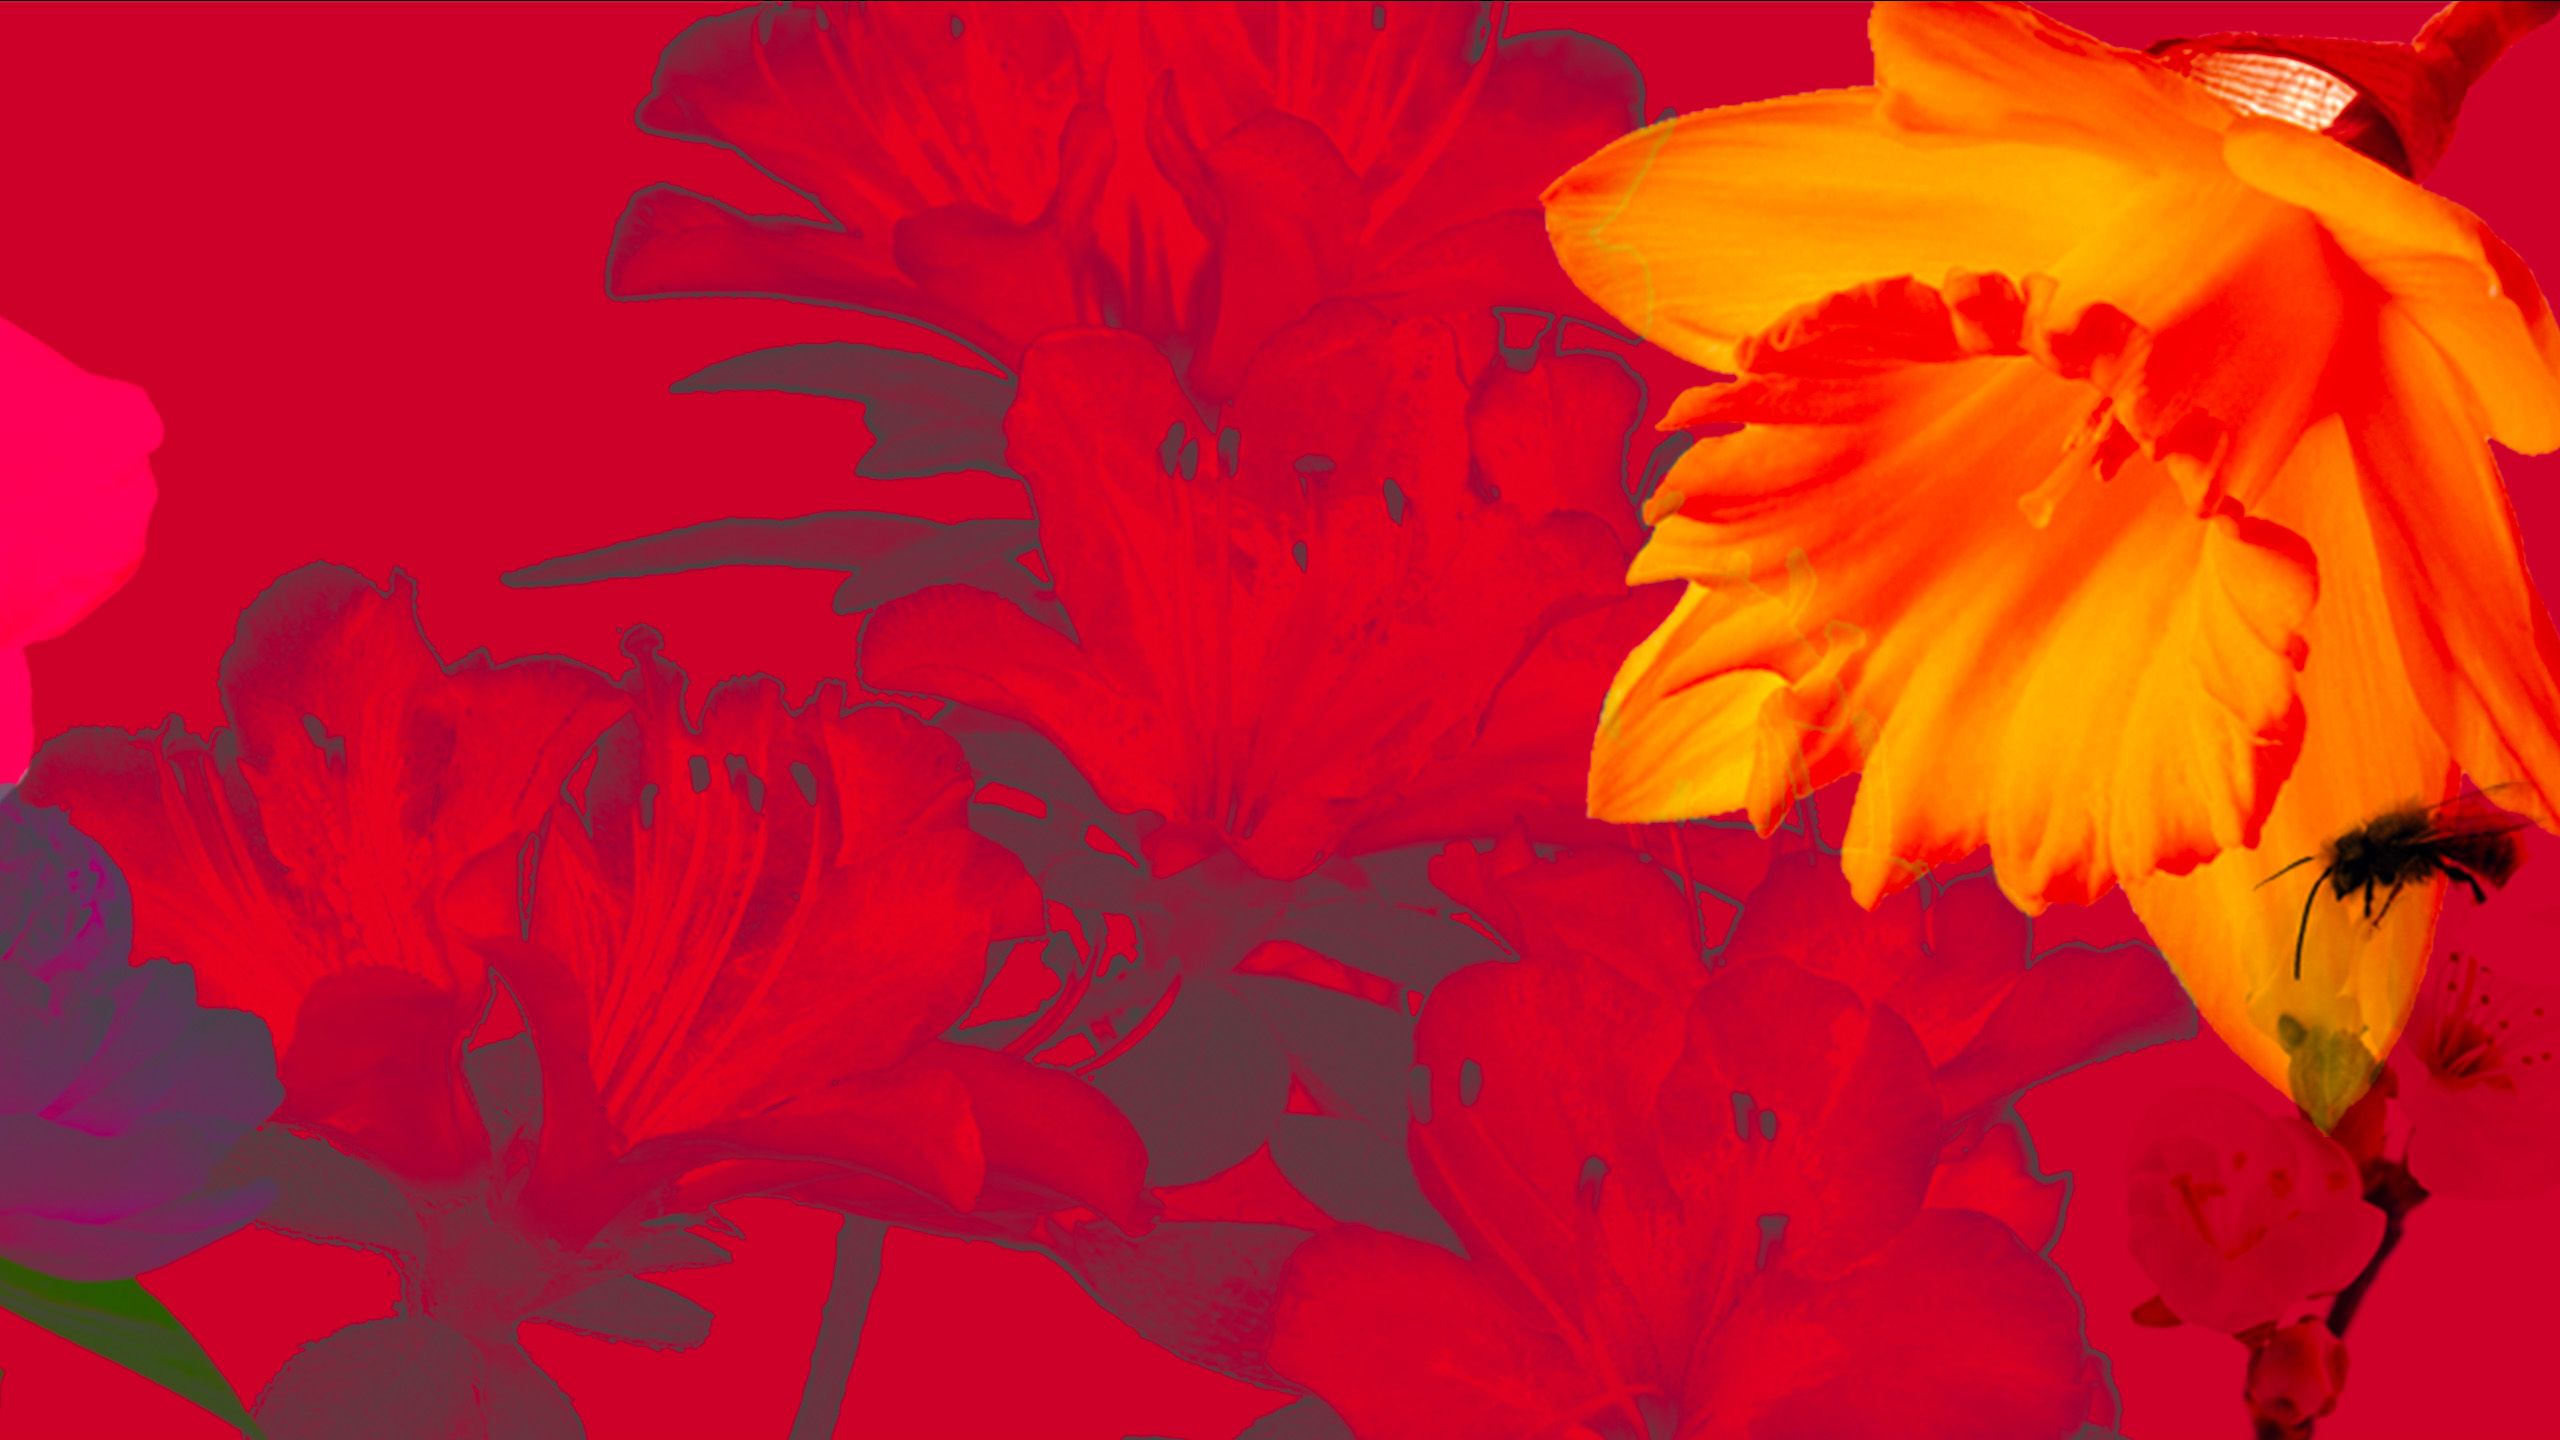 Stylized collage of native Georgia flowers on a red background including azaleas and daffodils